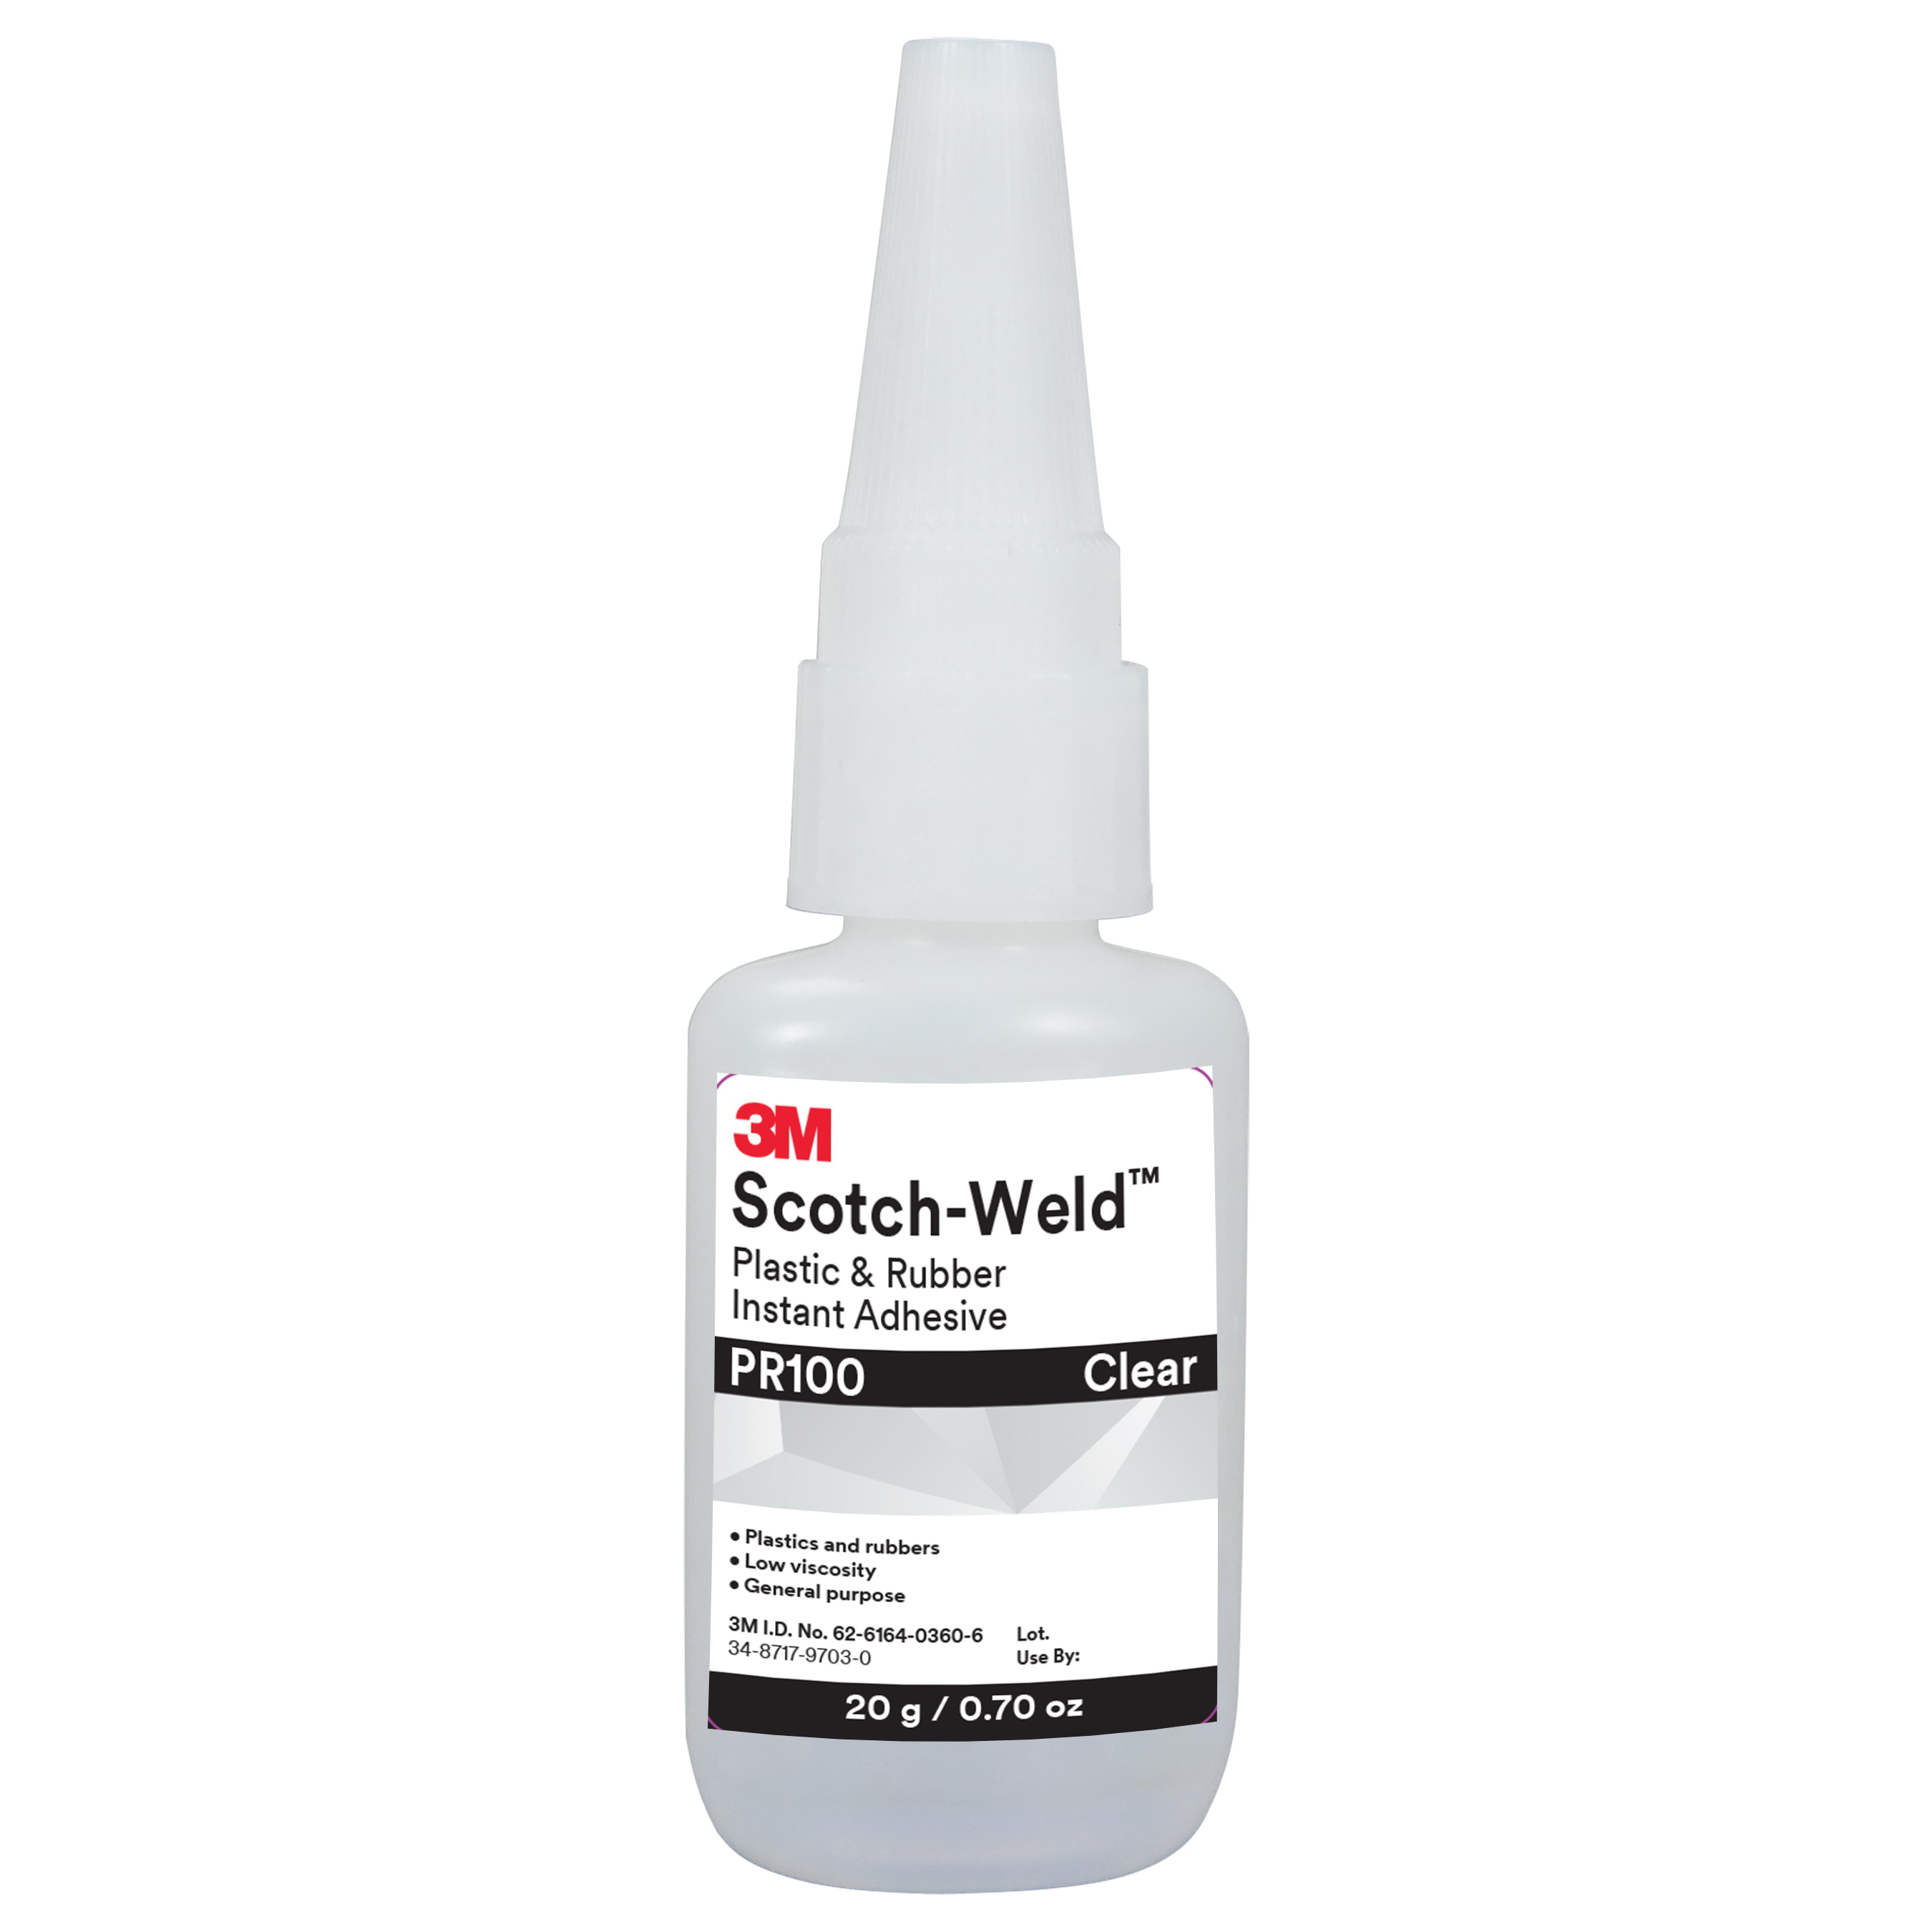 Scotch-Weld™ 051115-25214 PR Series Instant Adhesive, 20 g Bottle, Clear, 24 hr Curing